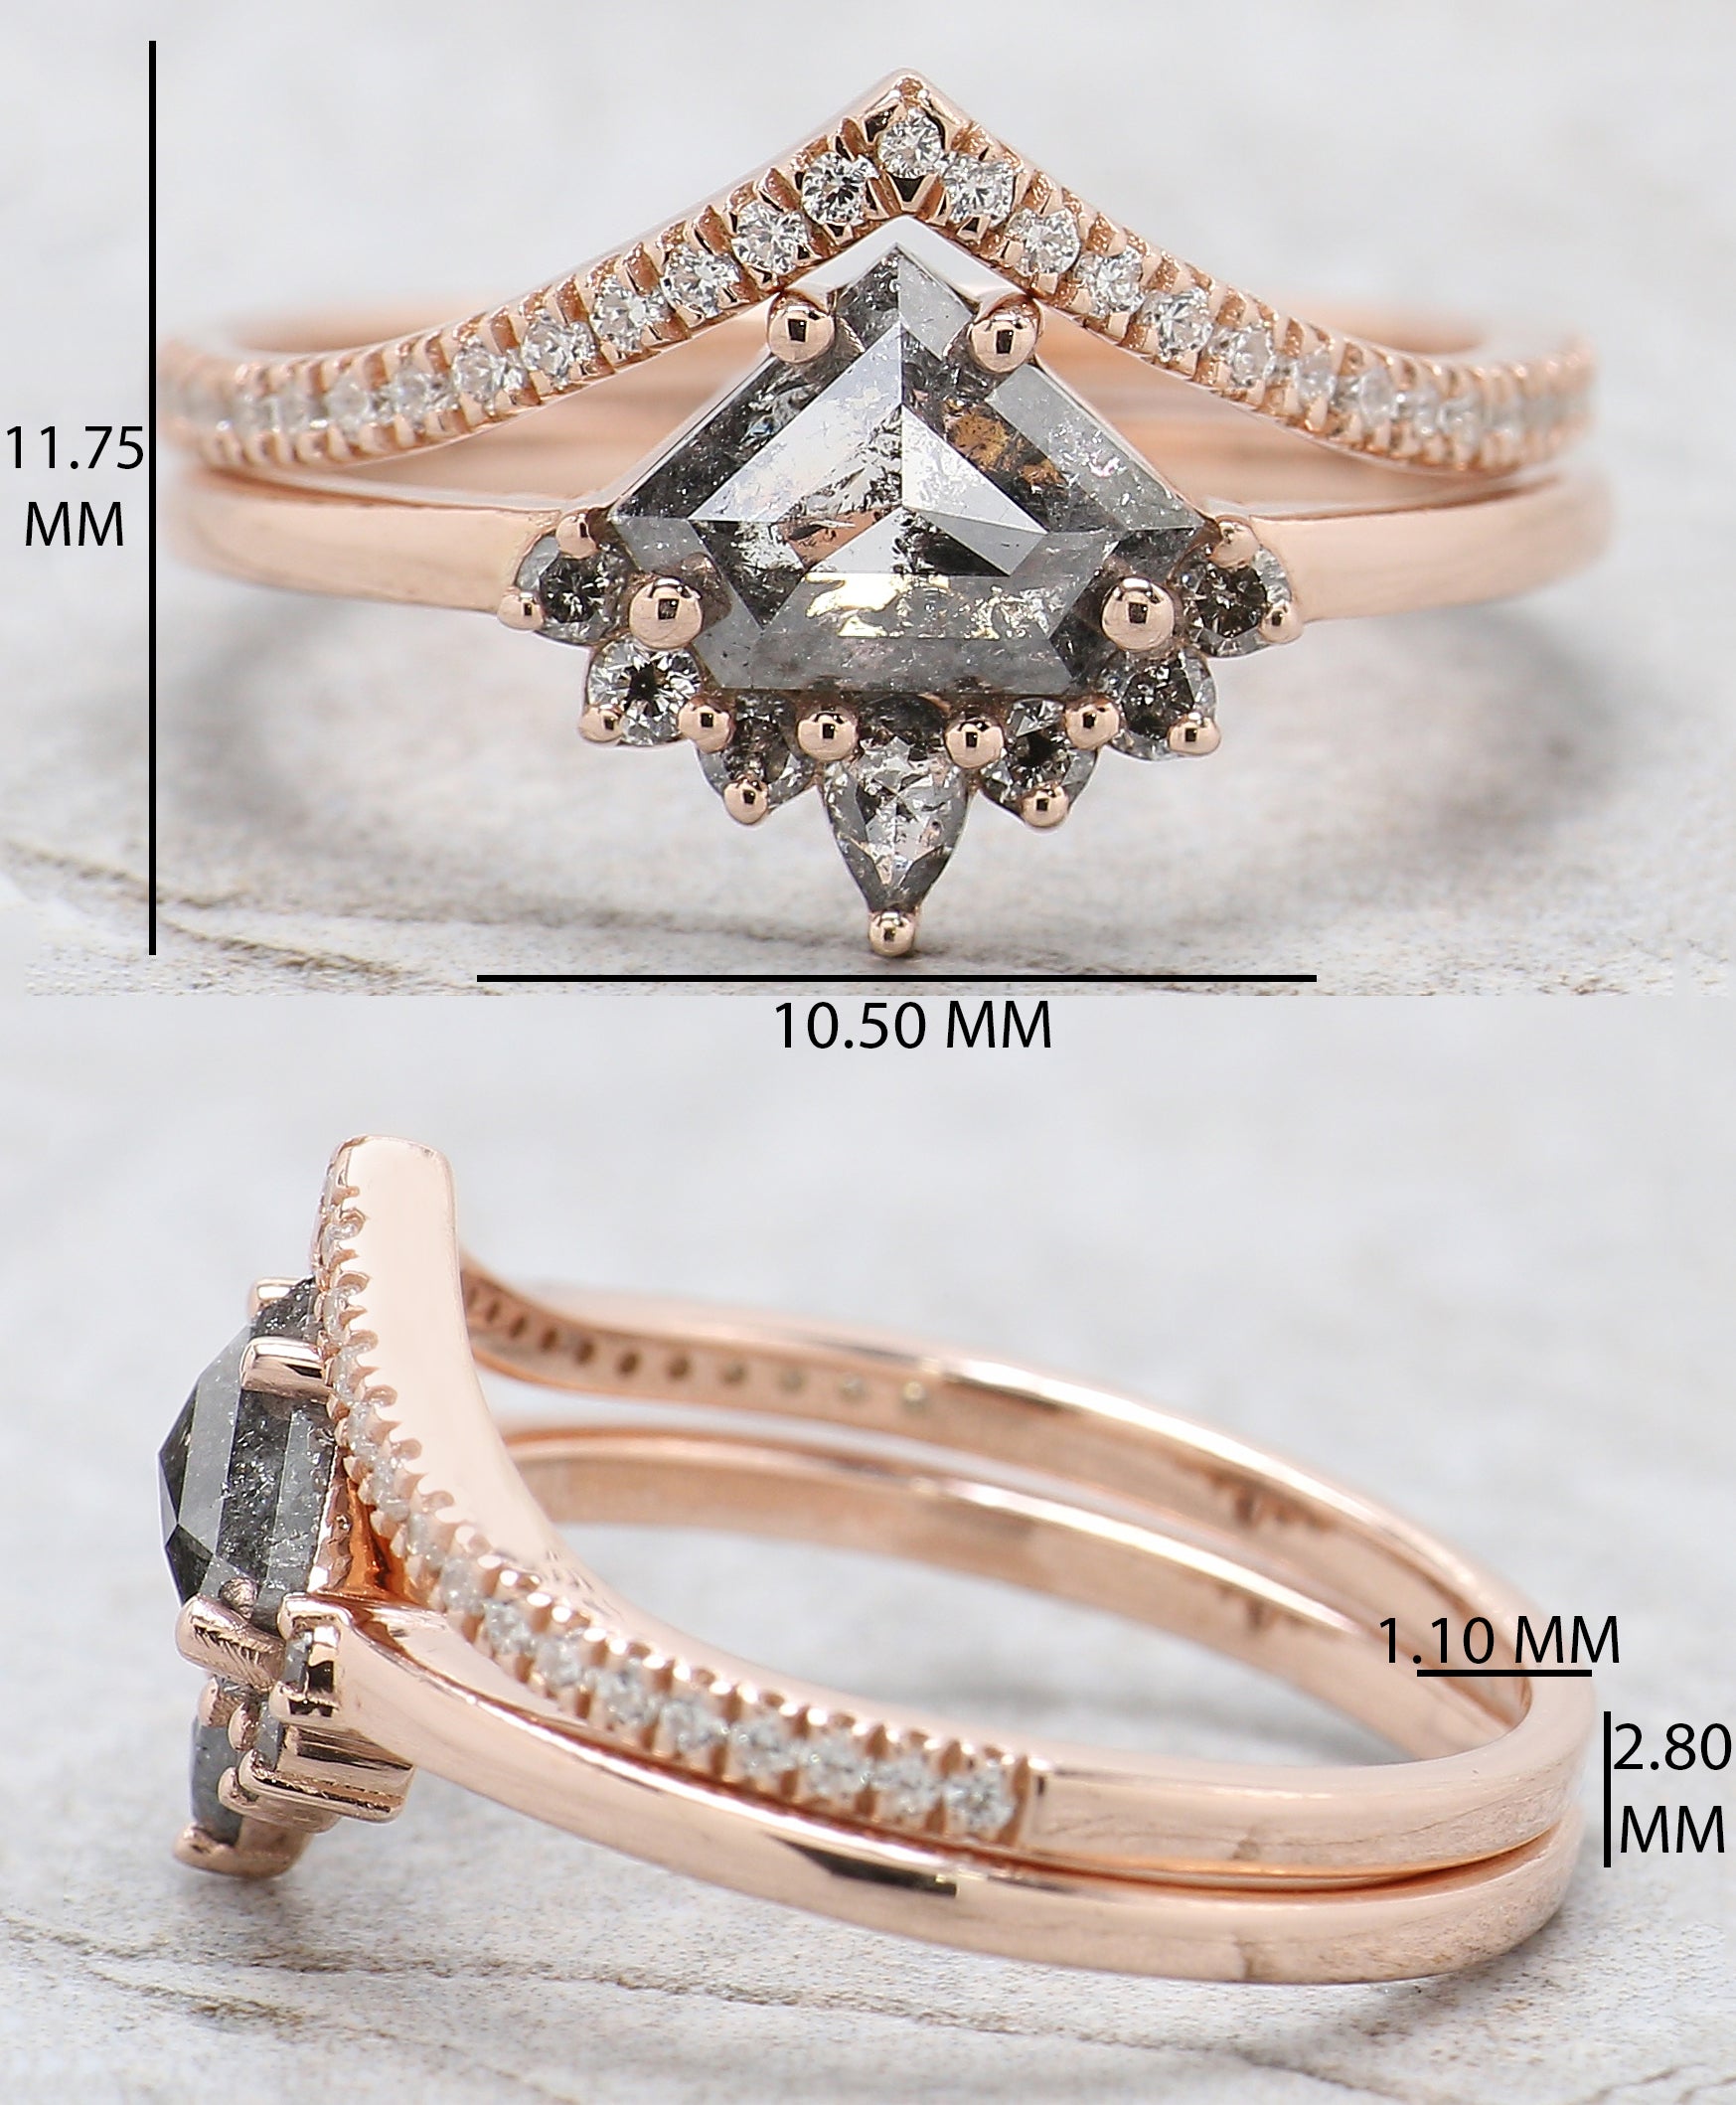 Shield Cut Salt And Pepper Diamond Ring 0.89 Ct 5.80 MM Shield Diamond Ring 14K Solid Rose Gold Silver Engagement Ring Gift For Her QN1226